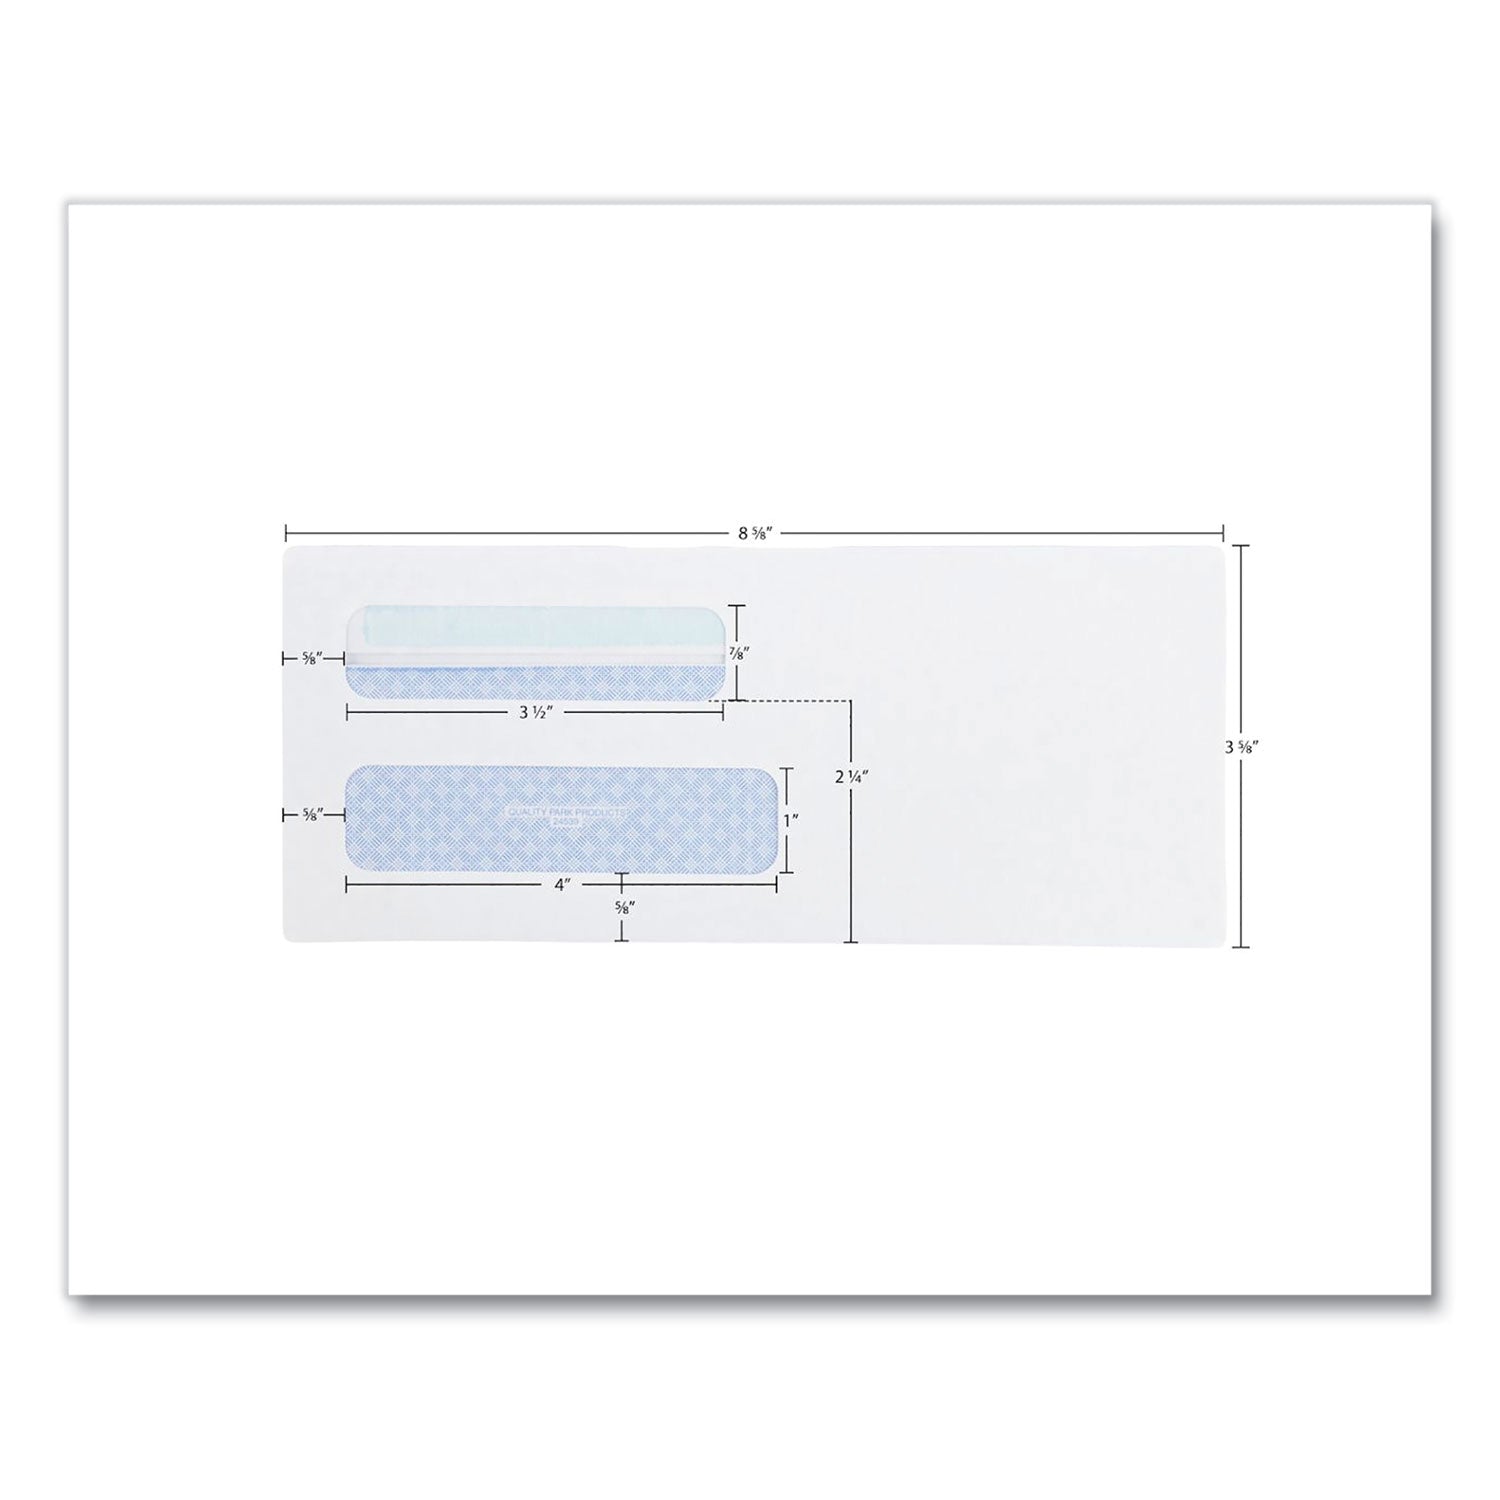 Double Window Redi-Seal Security-Tinted Envelope, #8 5/8, Commercial Flap, Redi-Seal Closure, 3.63 x 8.63, White, 500/Box - 